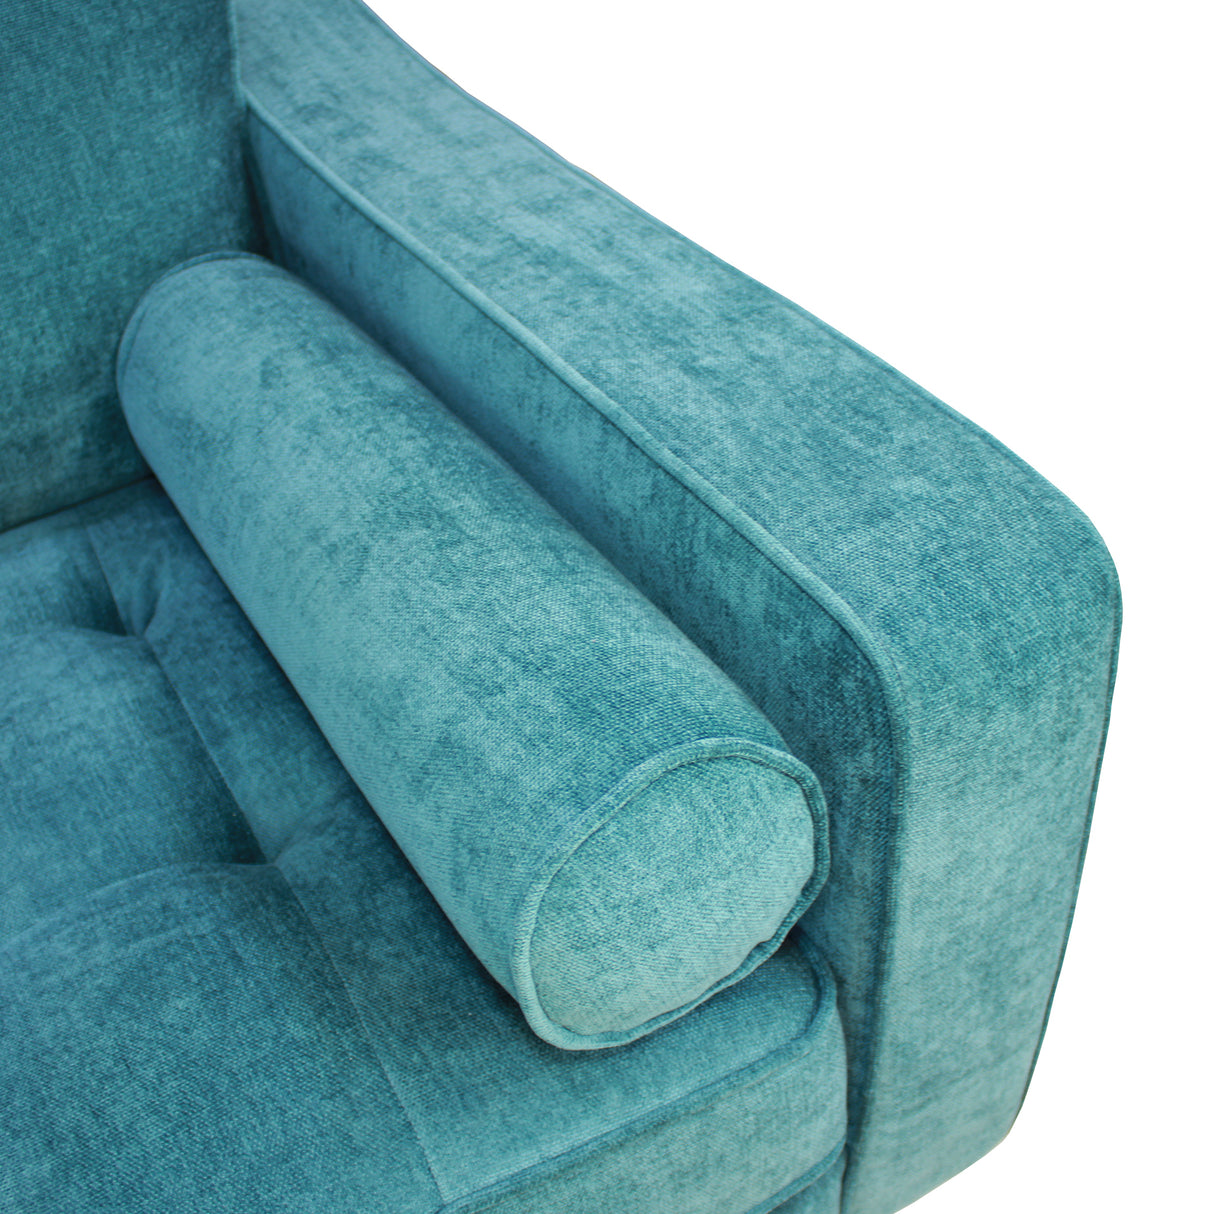 ANDERSON CHAIR - TURQUOISE - Home Elegance USA